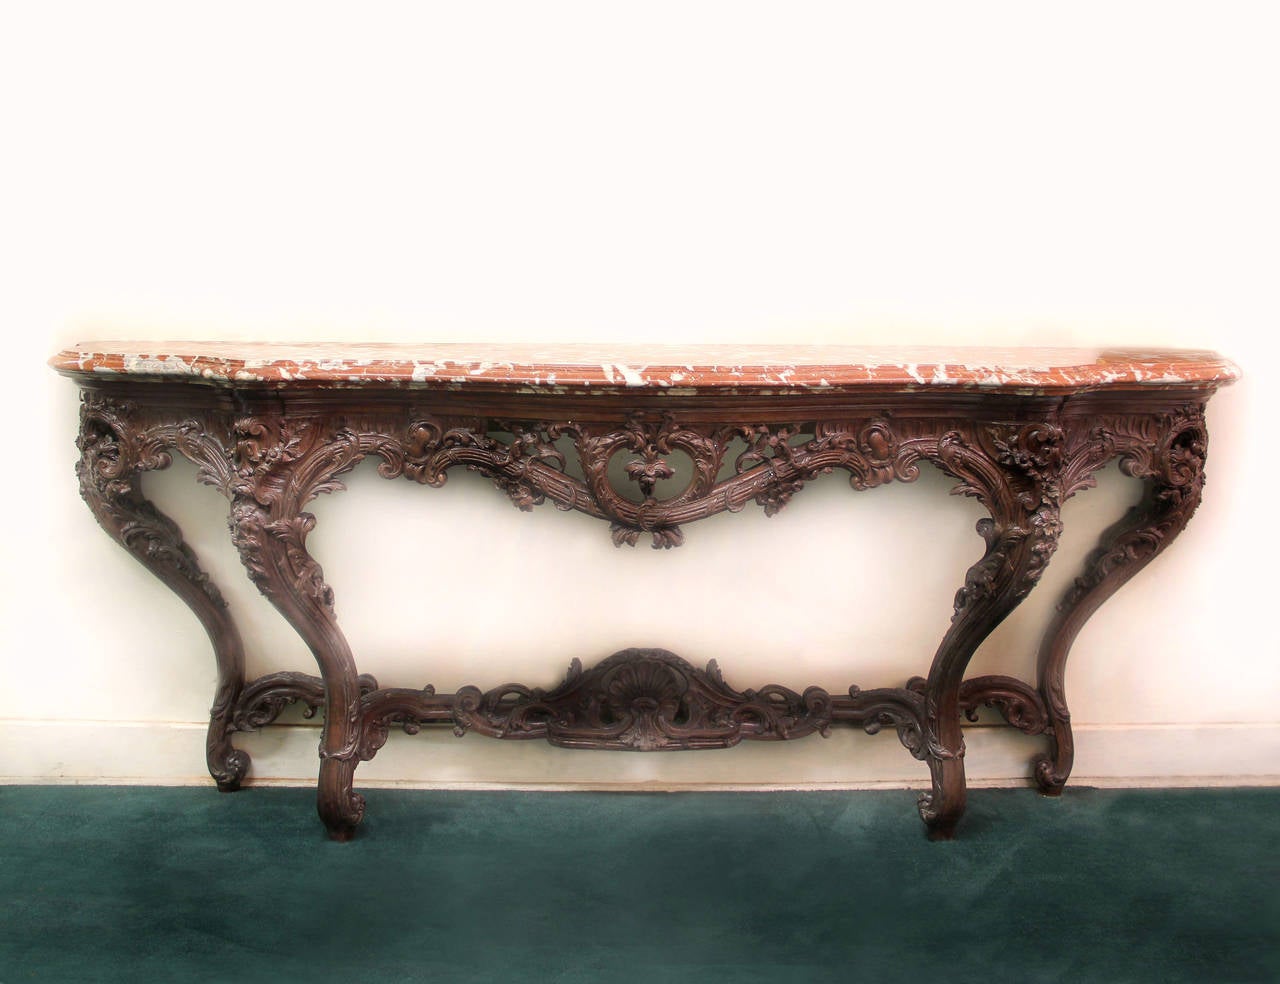 A large and important late 19th century Louis XV style carved oak console.

A thick molded Rouge de Maine marble top above hand-carved flower petals and acanthus leaves. The bottom stretcher is centered with a sea shell.

Stamped Gaumeloose to the